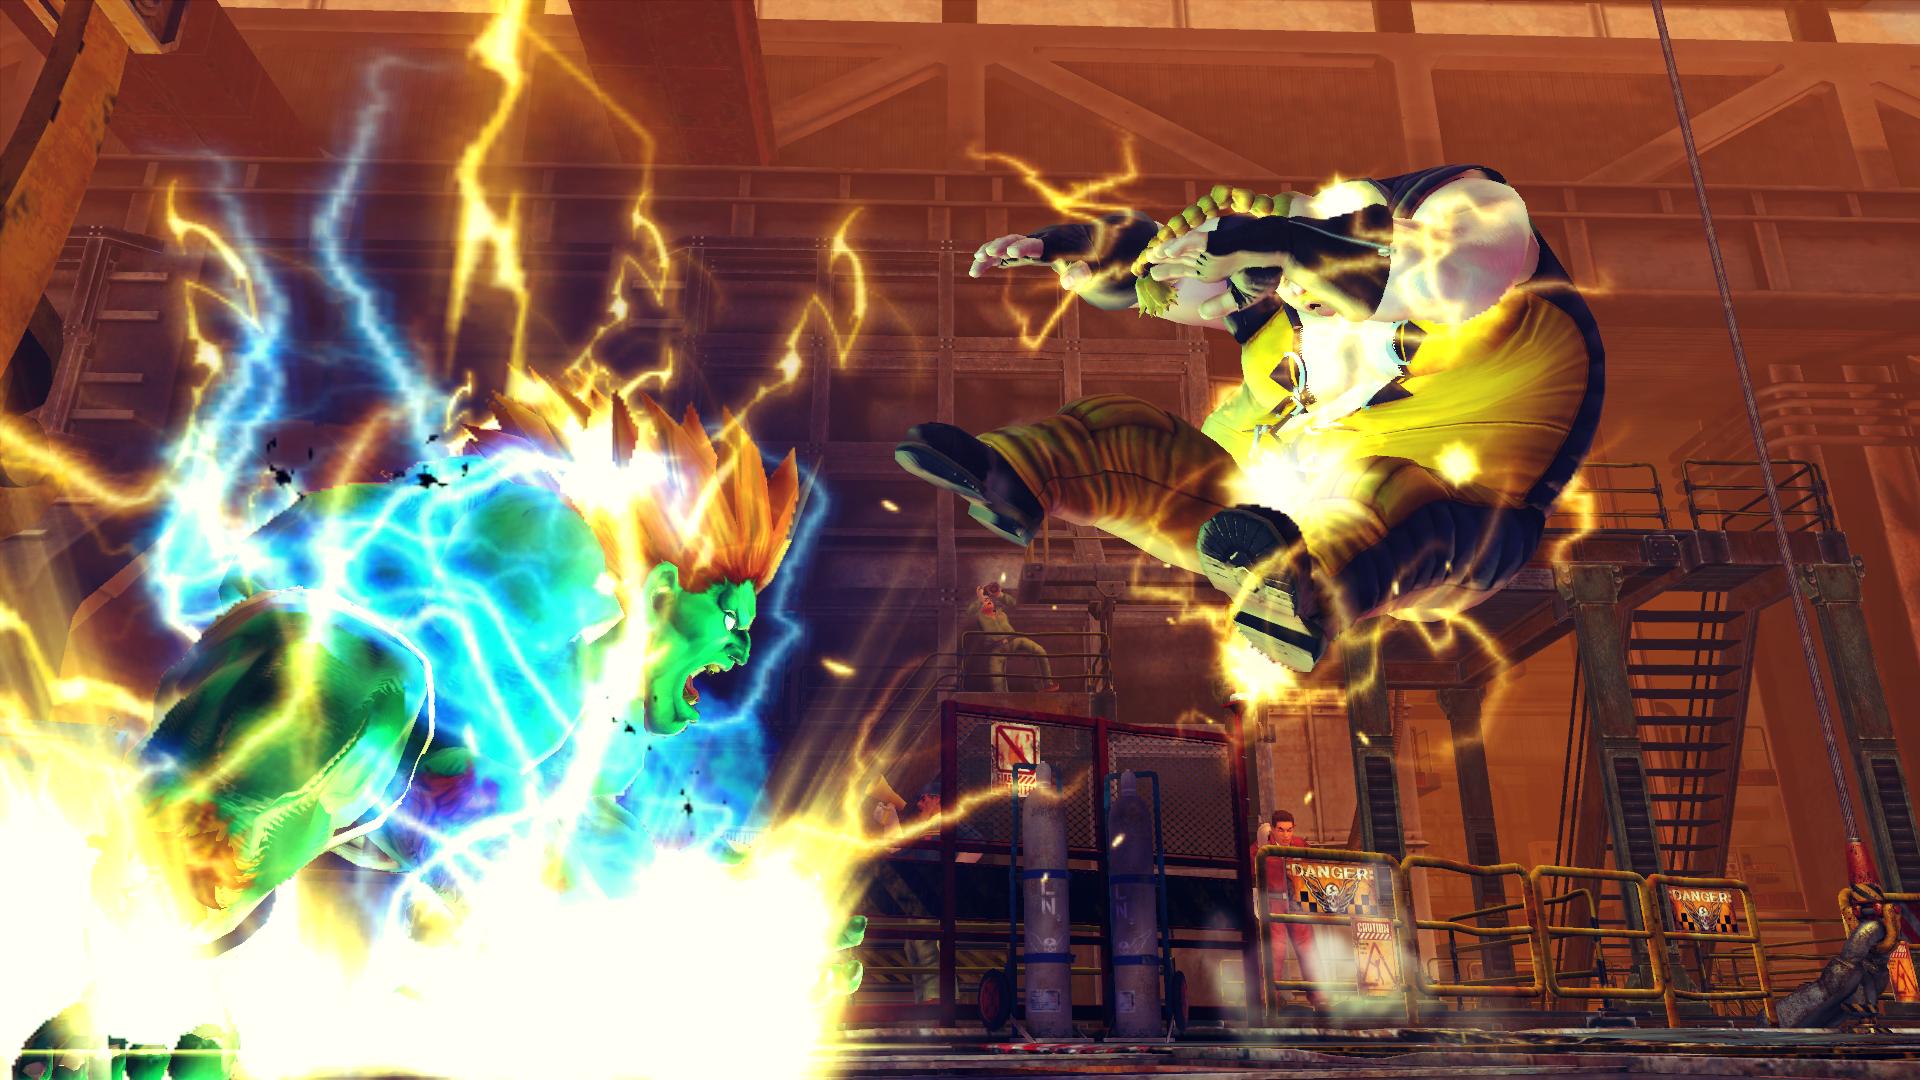 Save 87% on Ultra Street Fighter® IV on Steam